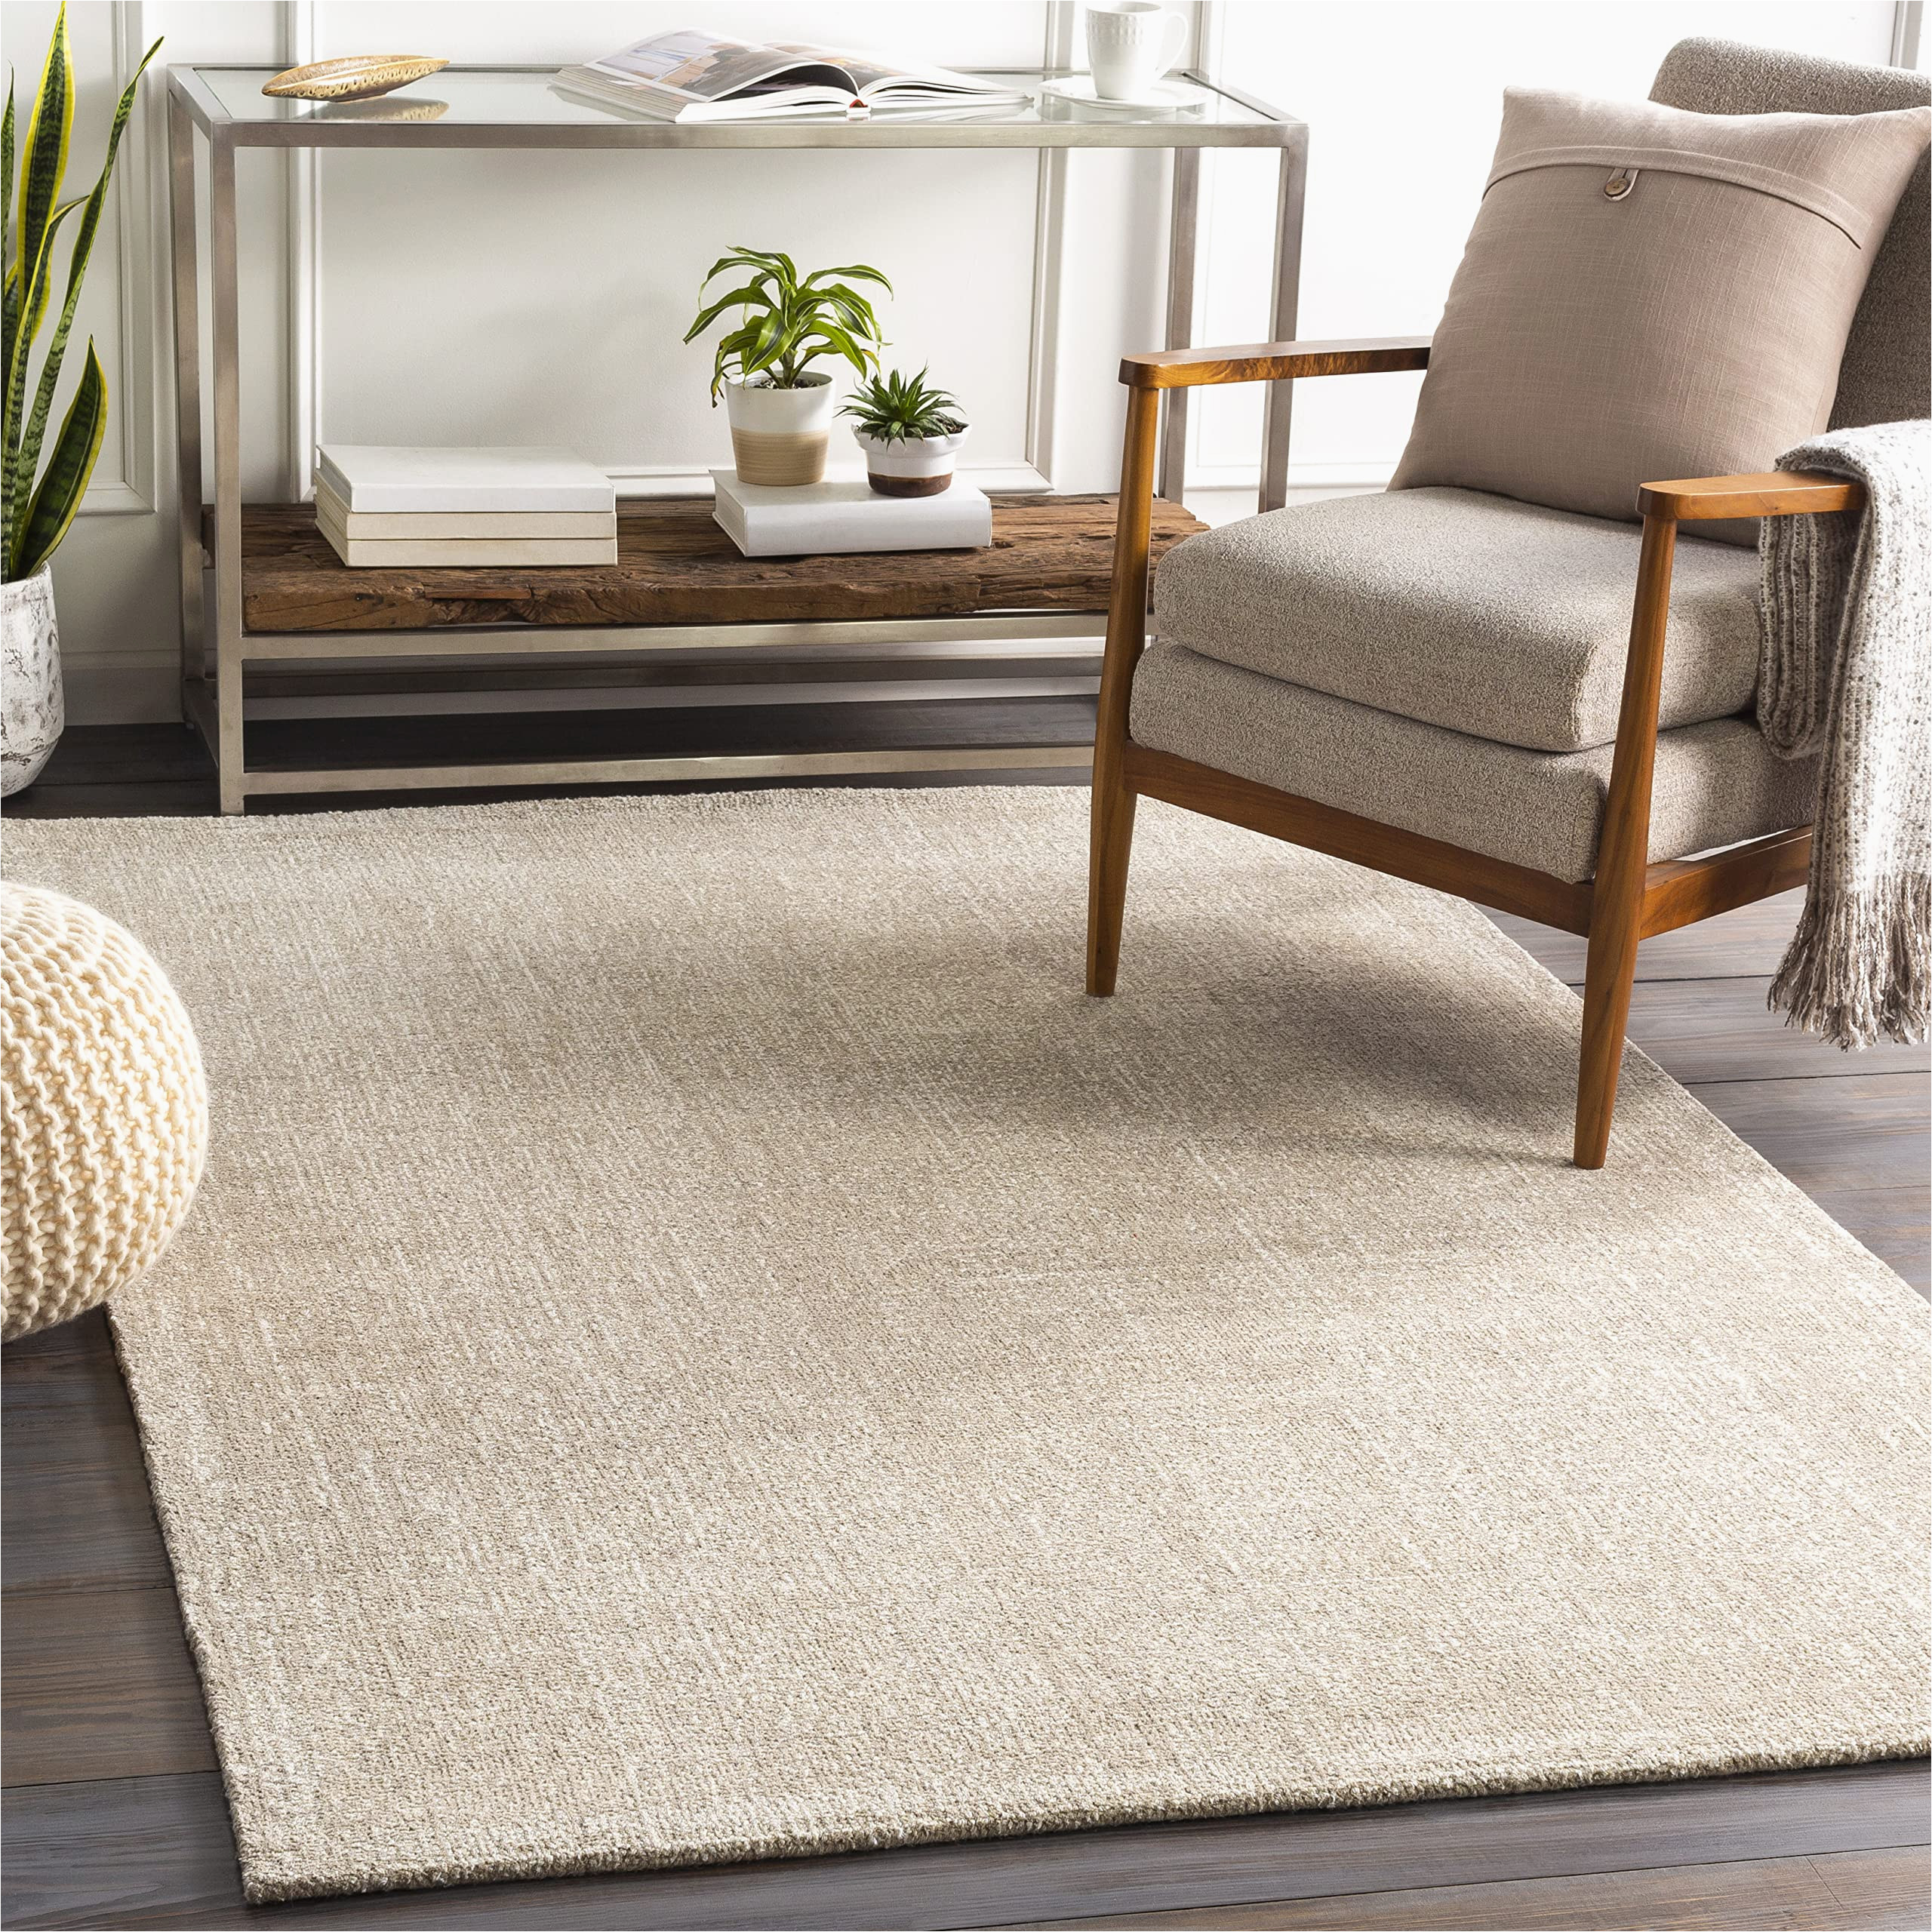 Solid Ivory area Rug 8×10 Mark&day area Rugs, 8×10 Giles solid and Border Ivory area Rug Beige Cream Carpet for Living Room, Bedroom or Kitchen (8′ X 10′)